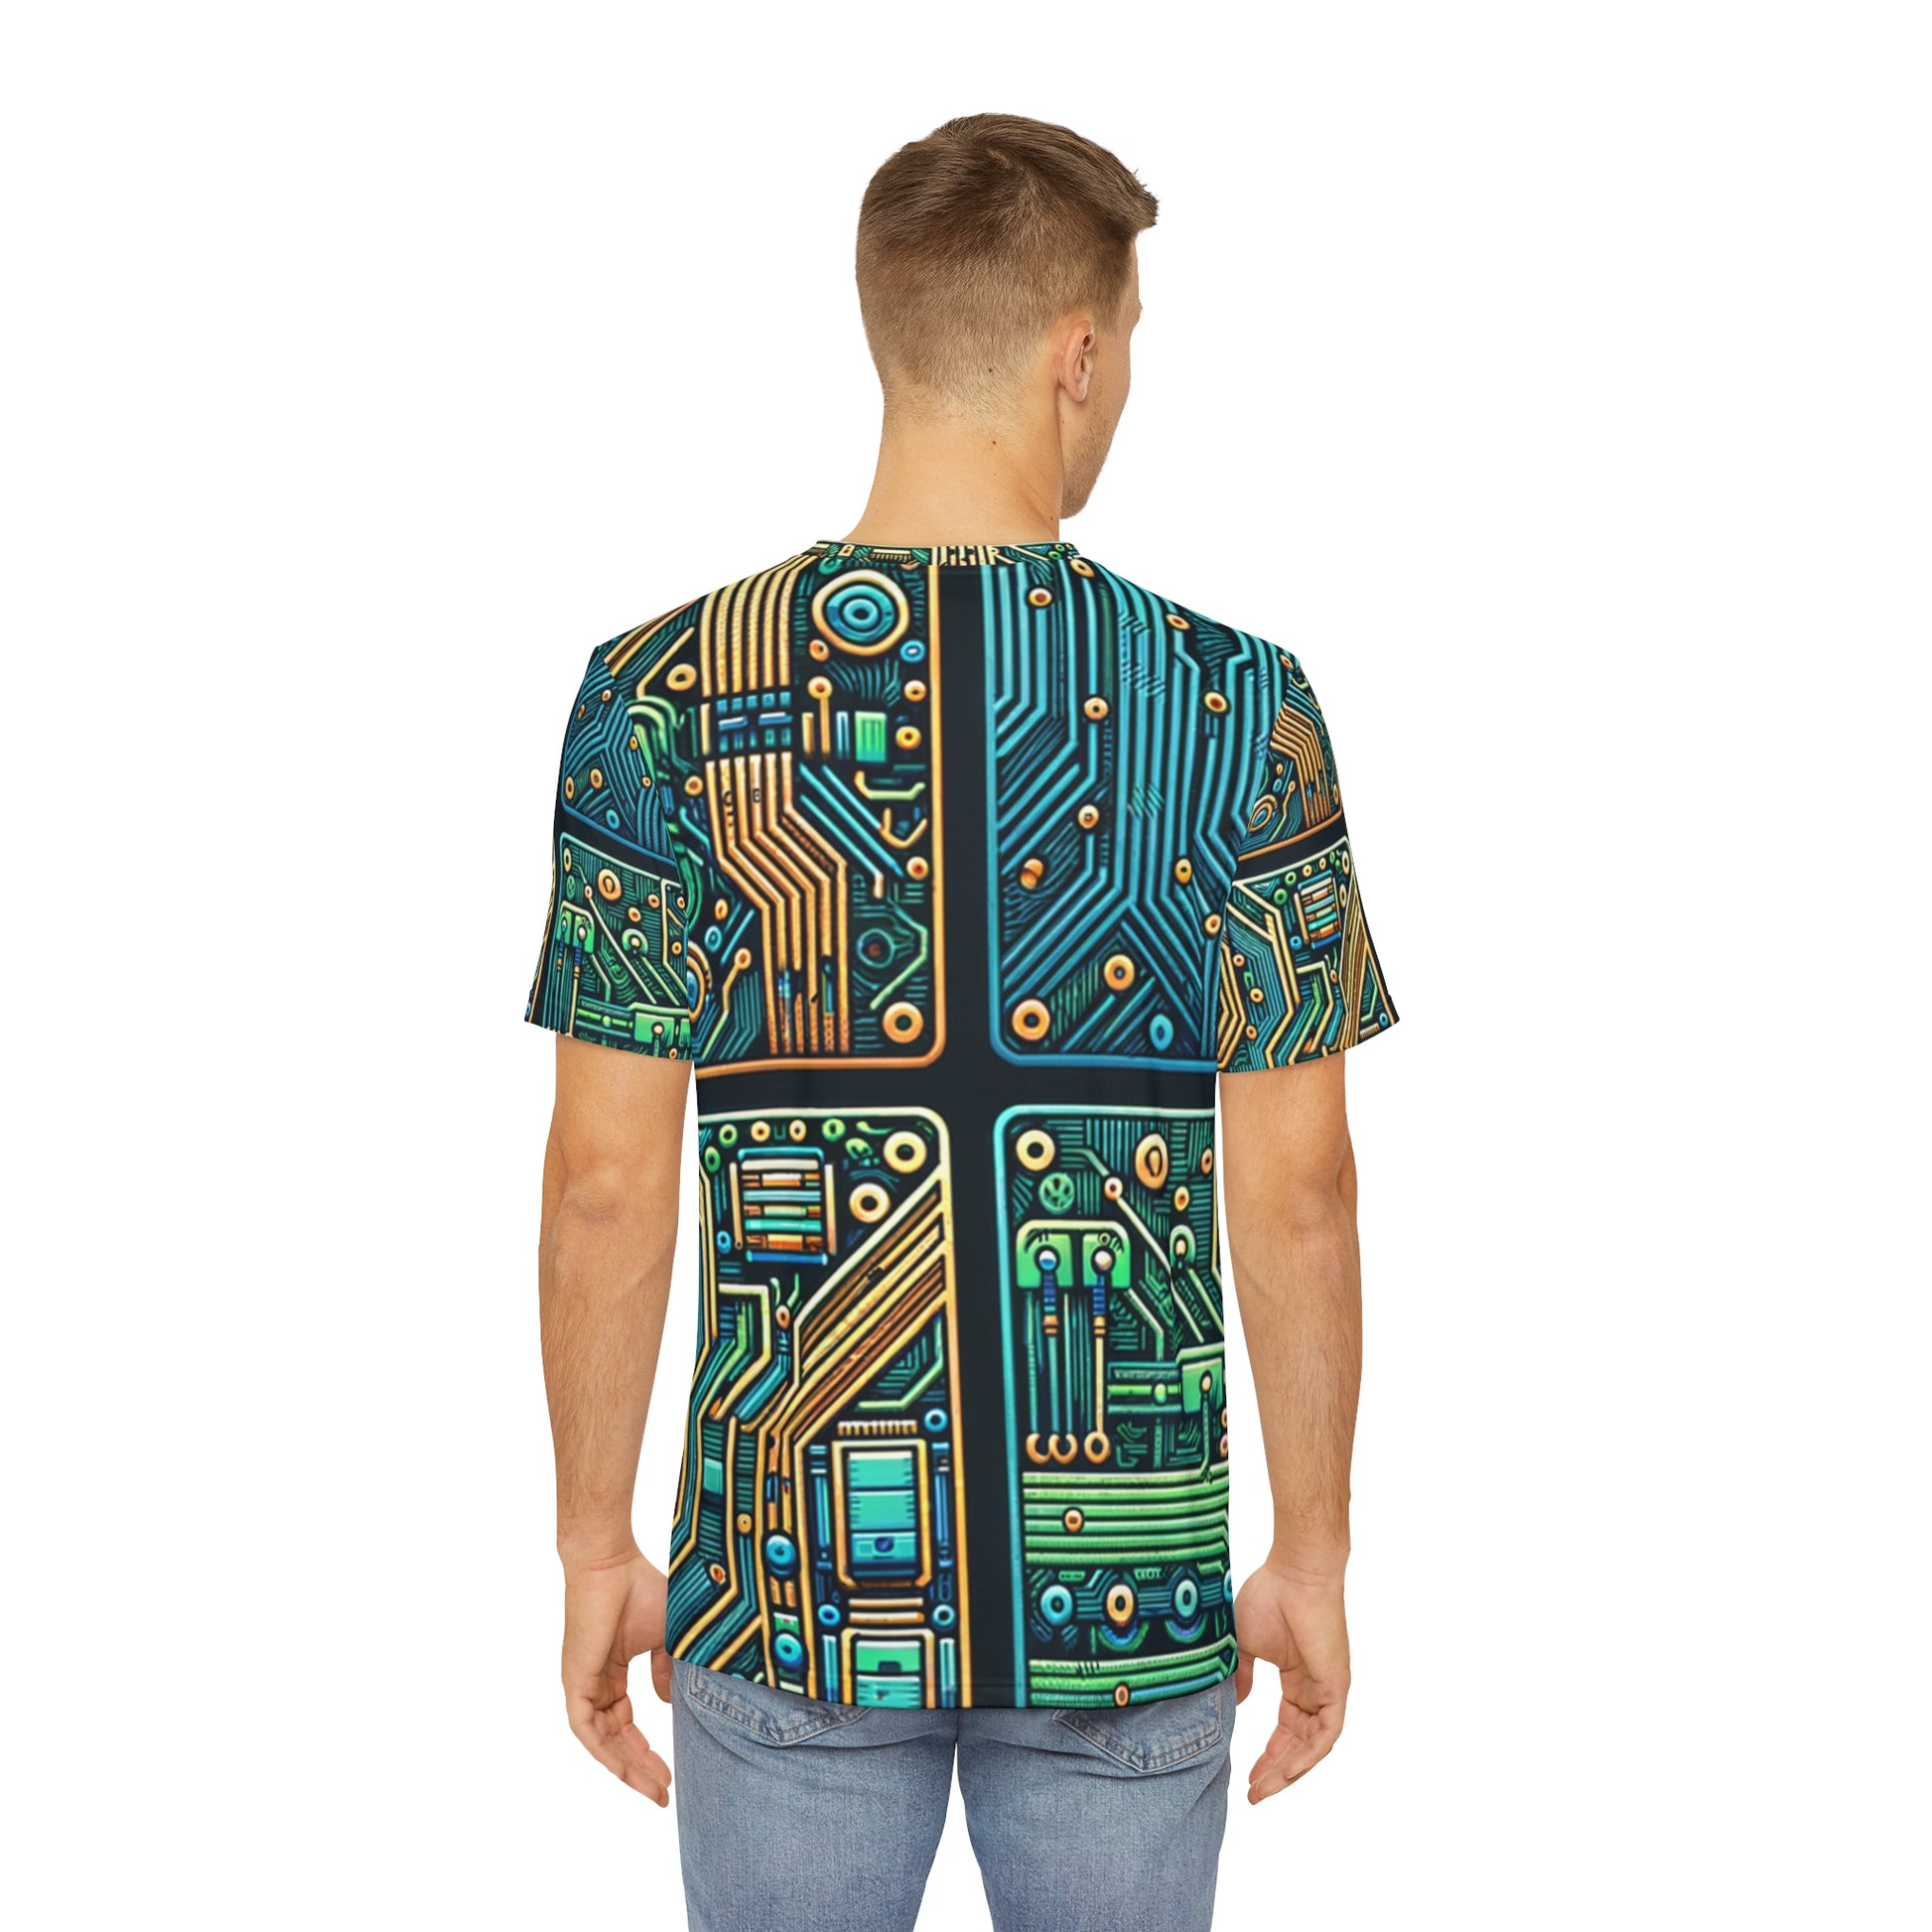 Back view of the Circuit Synapse Array Crewneck Pullover All-Over Print Short-Sleeved Shirt blue green yellow black white circuit pattern paired with casual denim pants worn by a white man